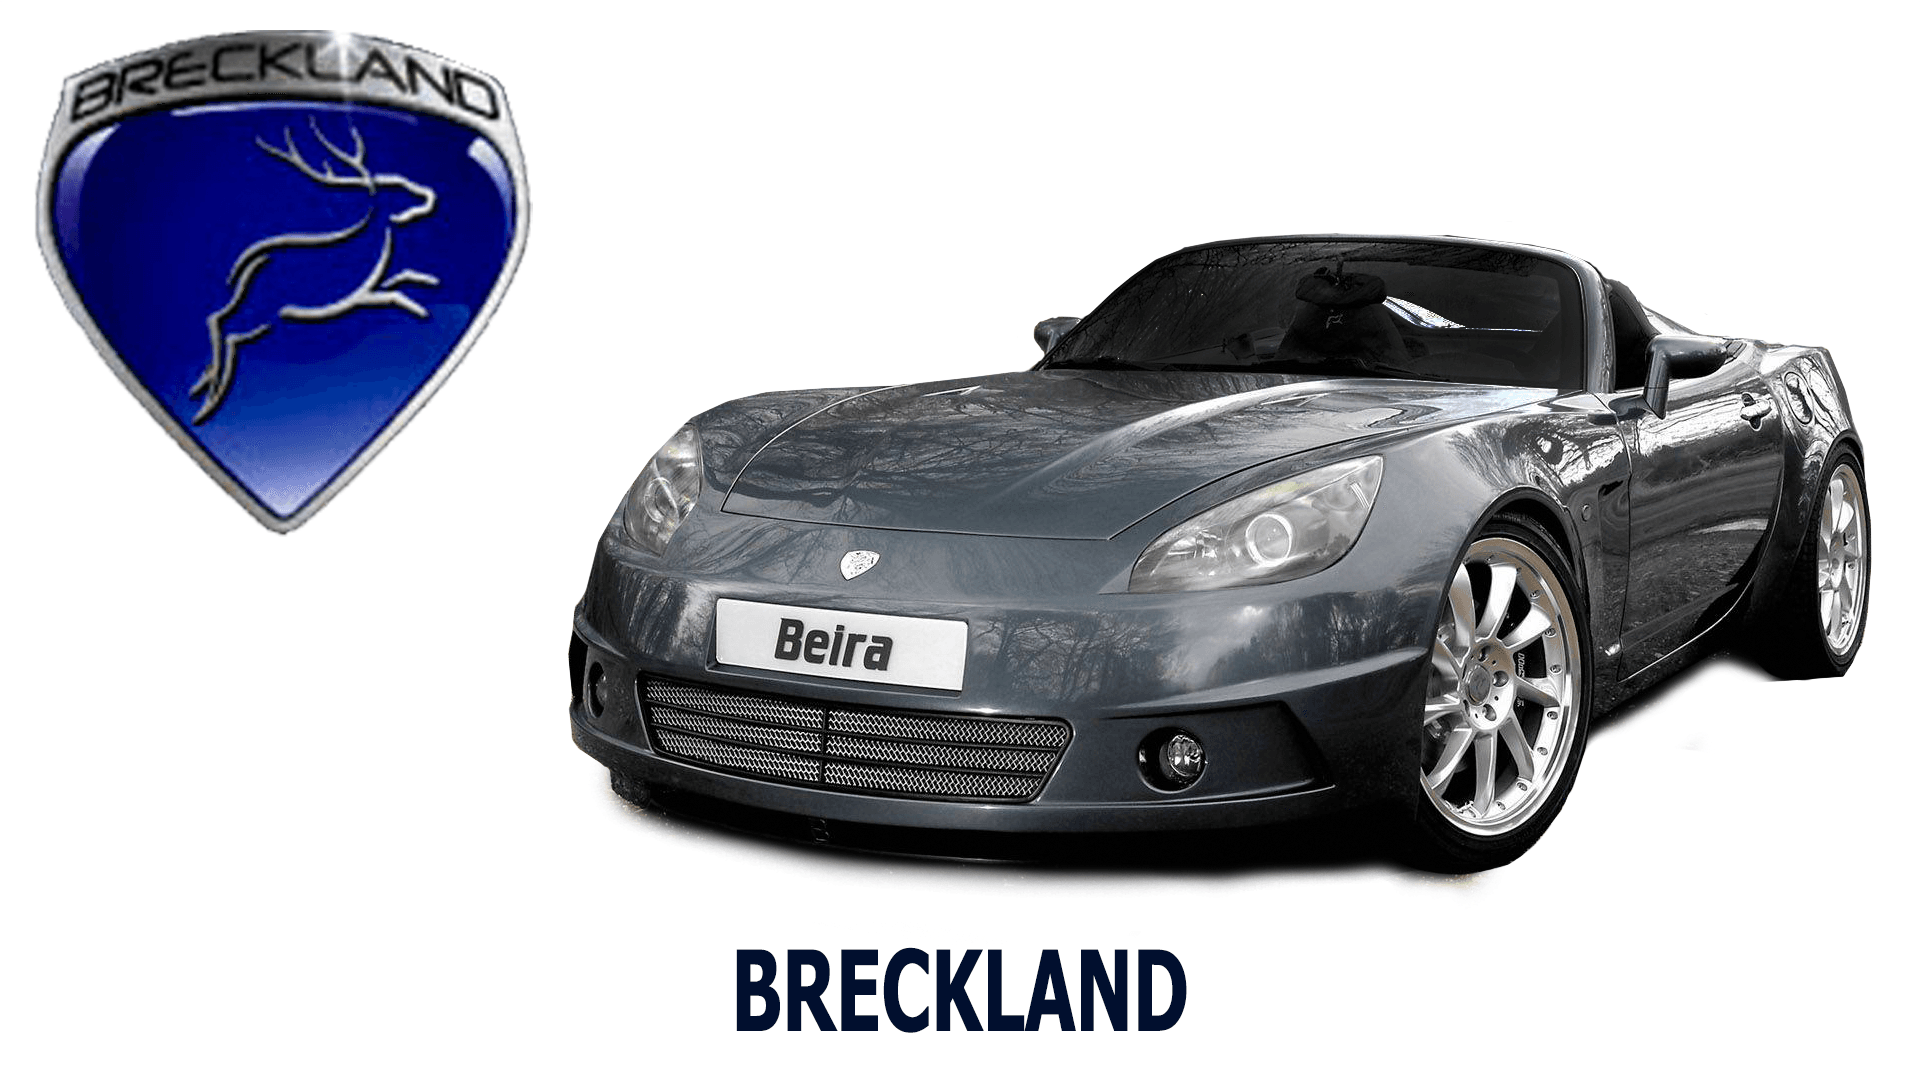 Breckland Beira Wallpapers